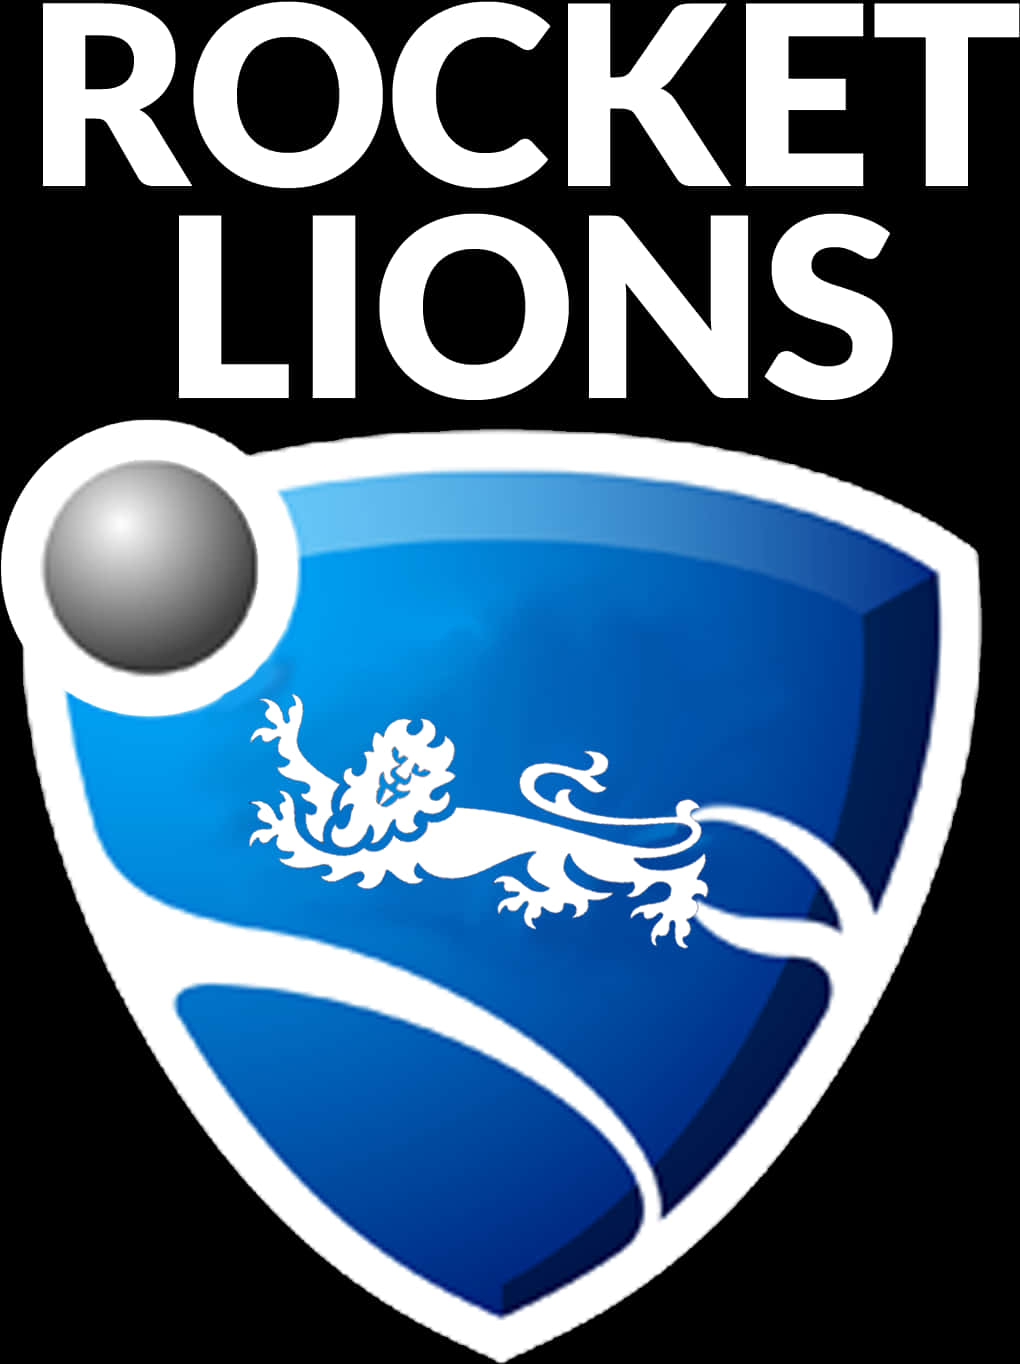 A Blue Shield With A Lion And A Ball